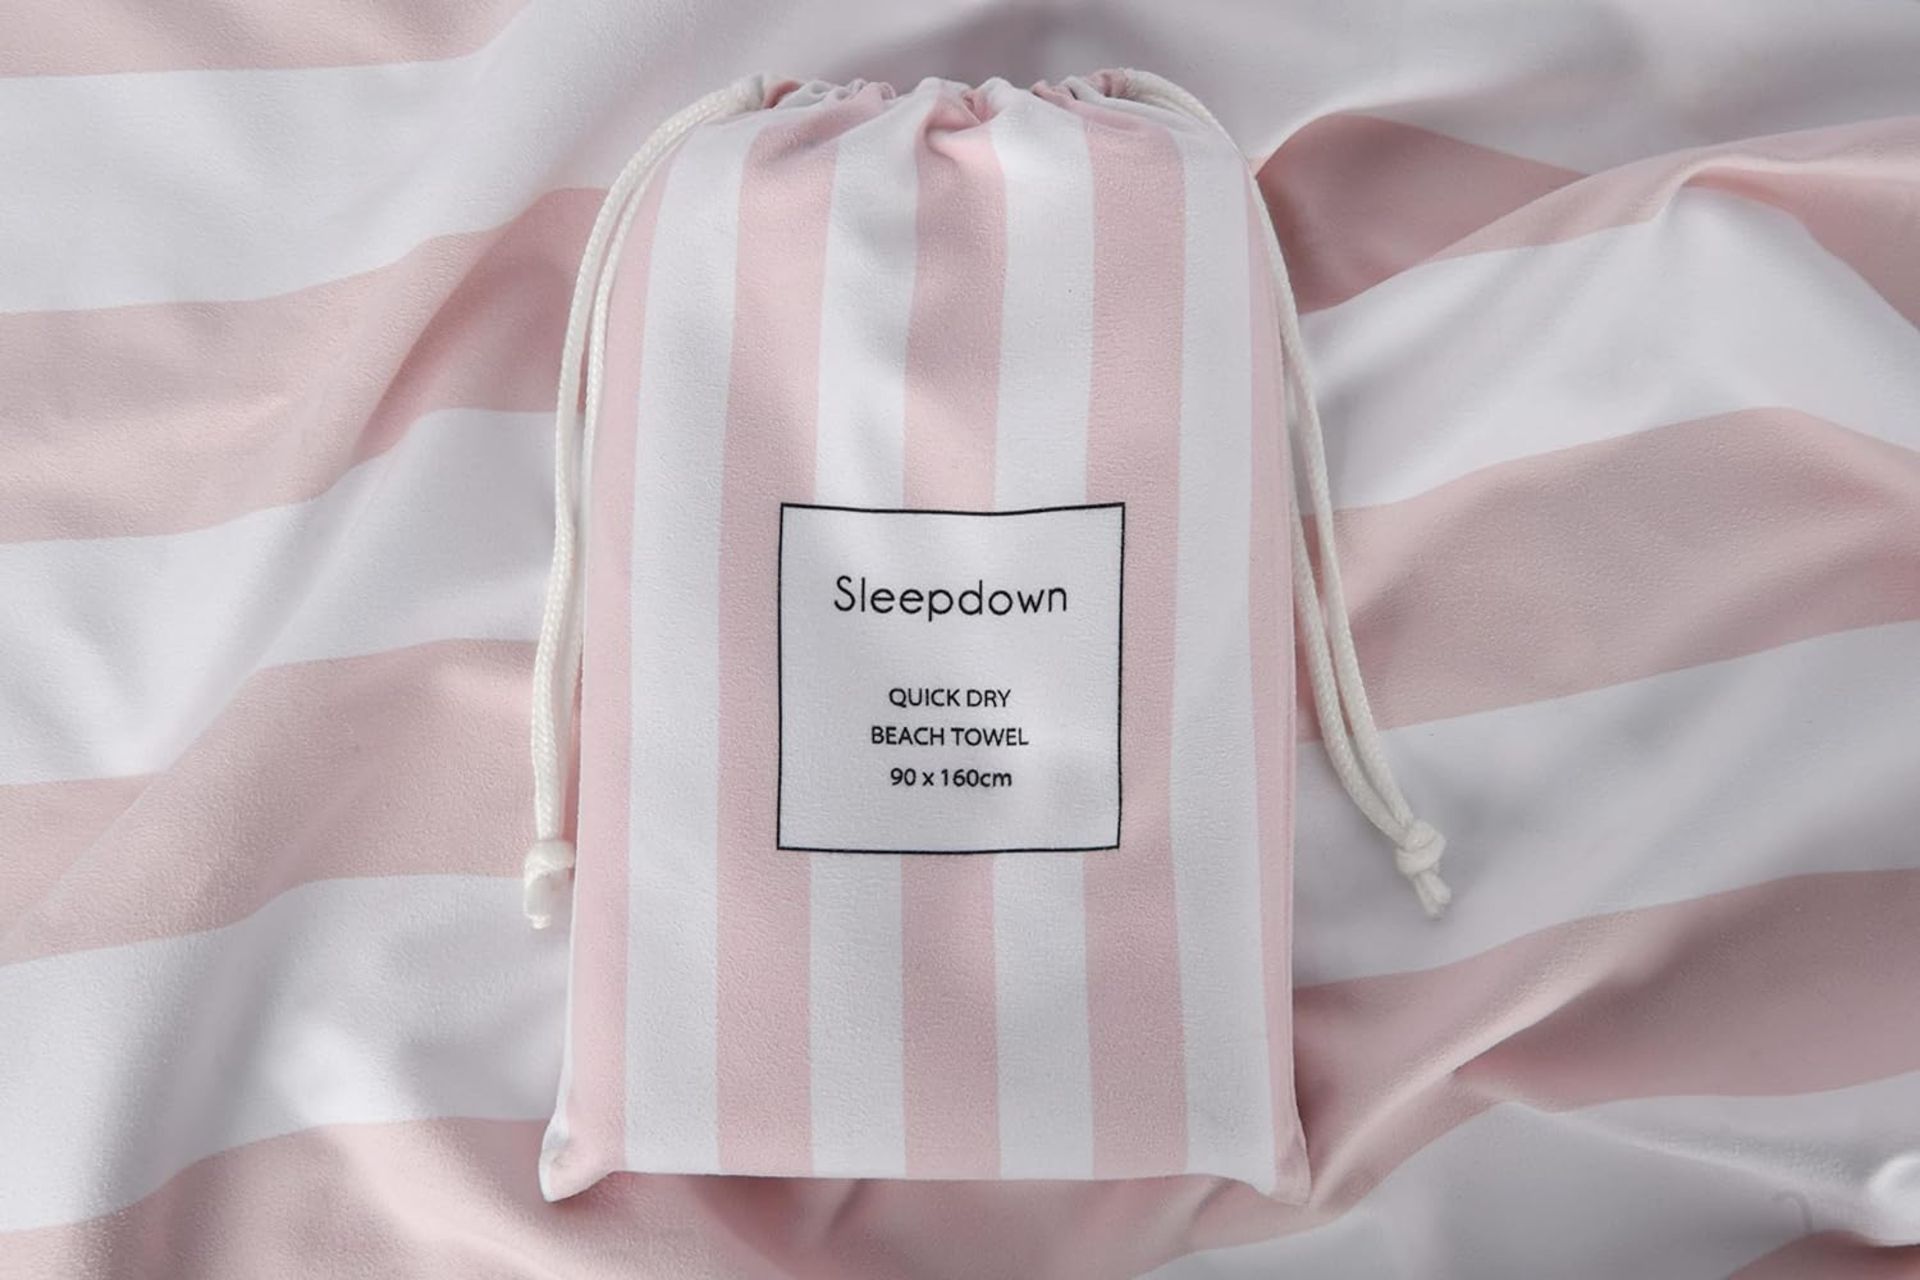 11x NEW & PACKAGED SLEEPDOWN Quick Dry Beach Towel 90 x 160cm With Carry Pouch - BLUSH. RRP £21.99 - Bild 2 aus 2